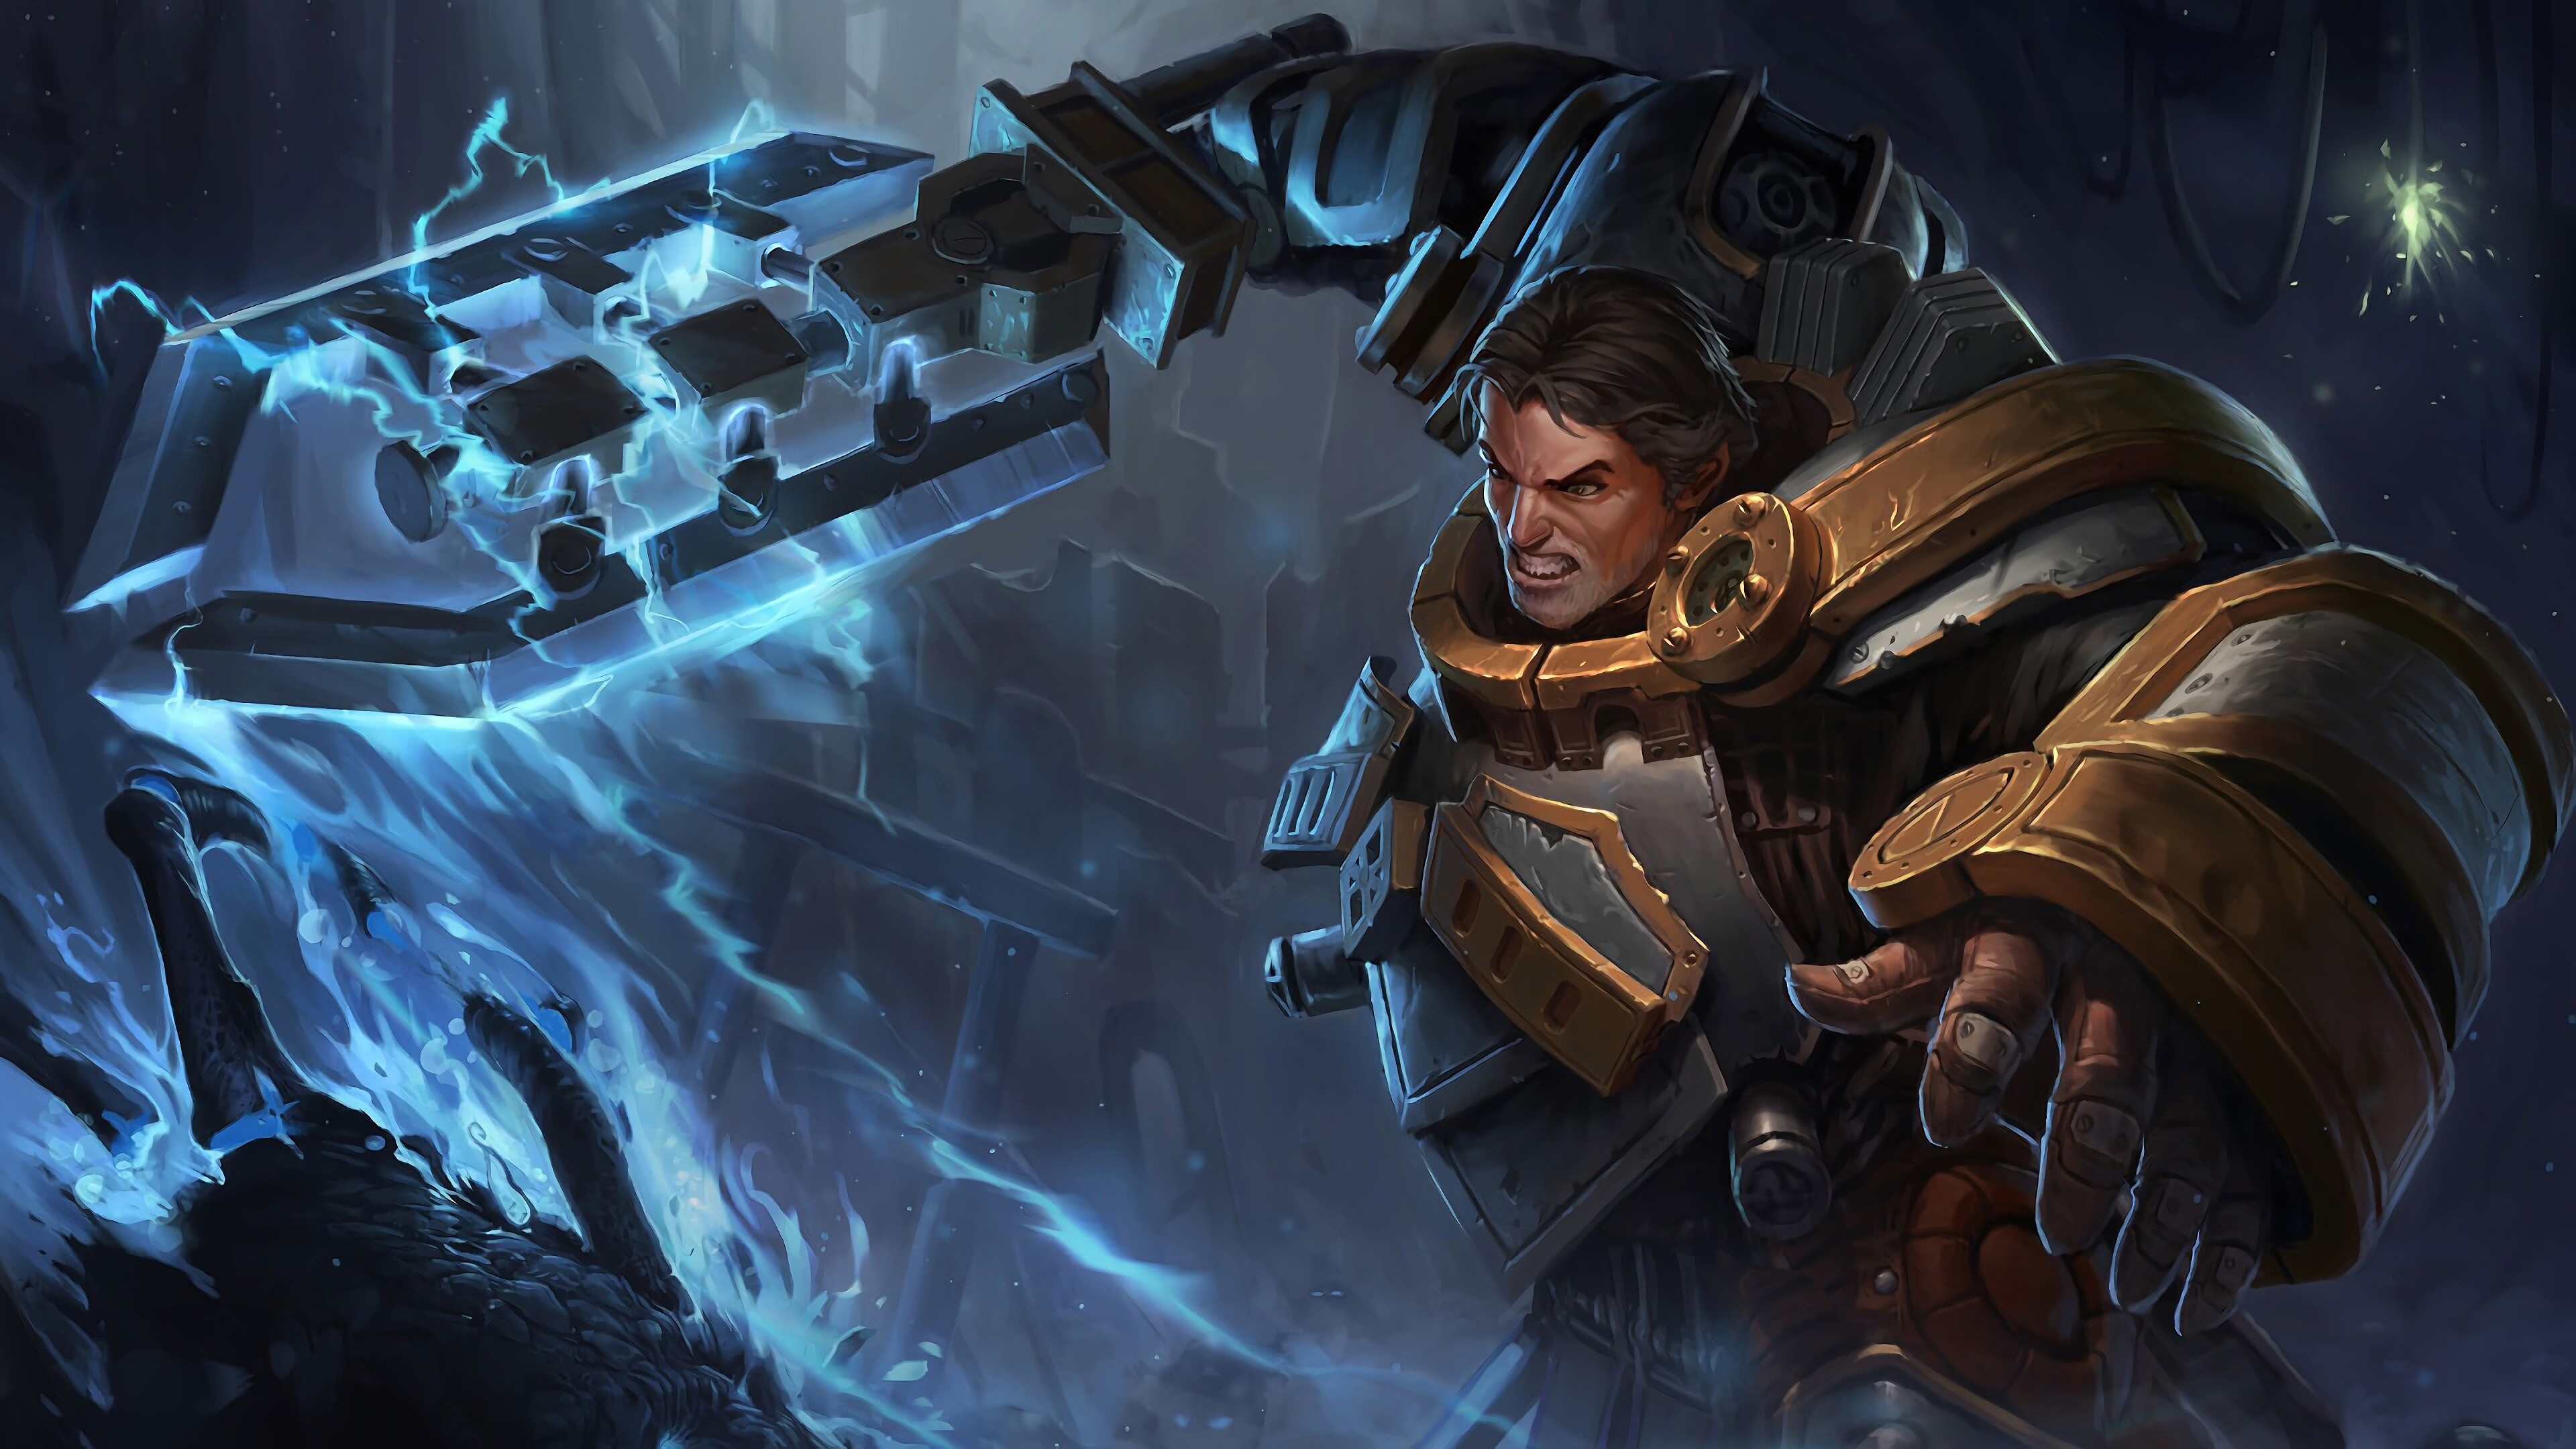 Garen: Heavily armored champion in League of Legends, A 2009 multiplayer online battle arena video game. 3840x2160 4K Wallpaper.